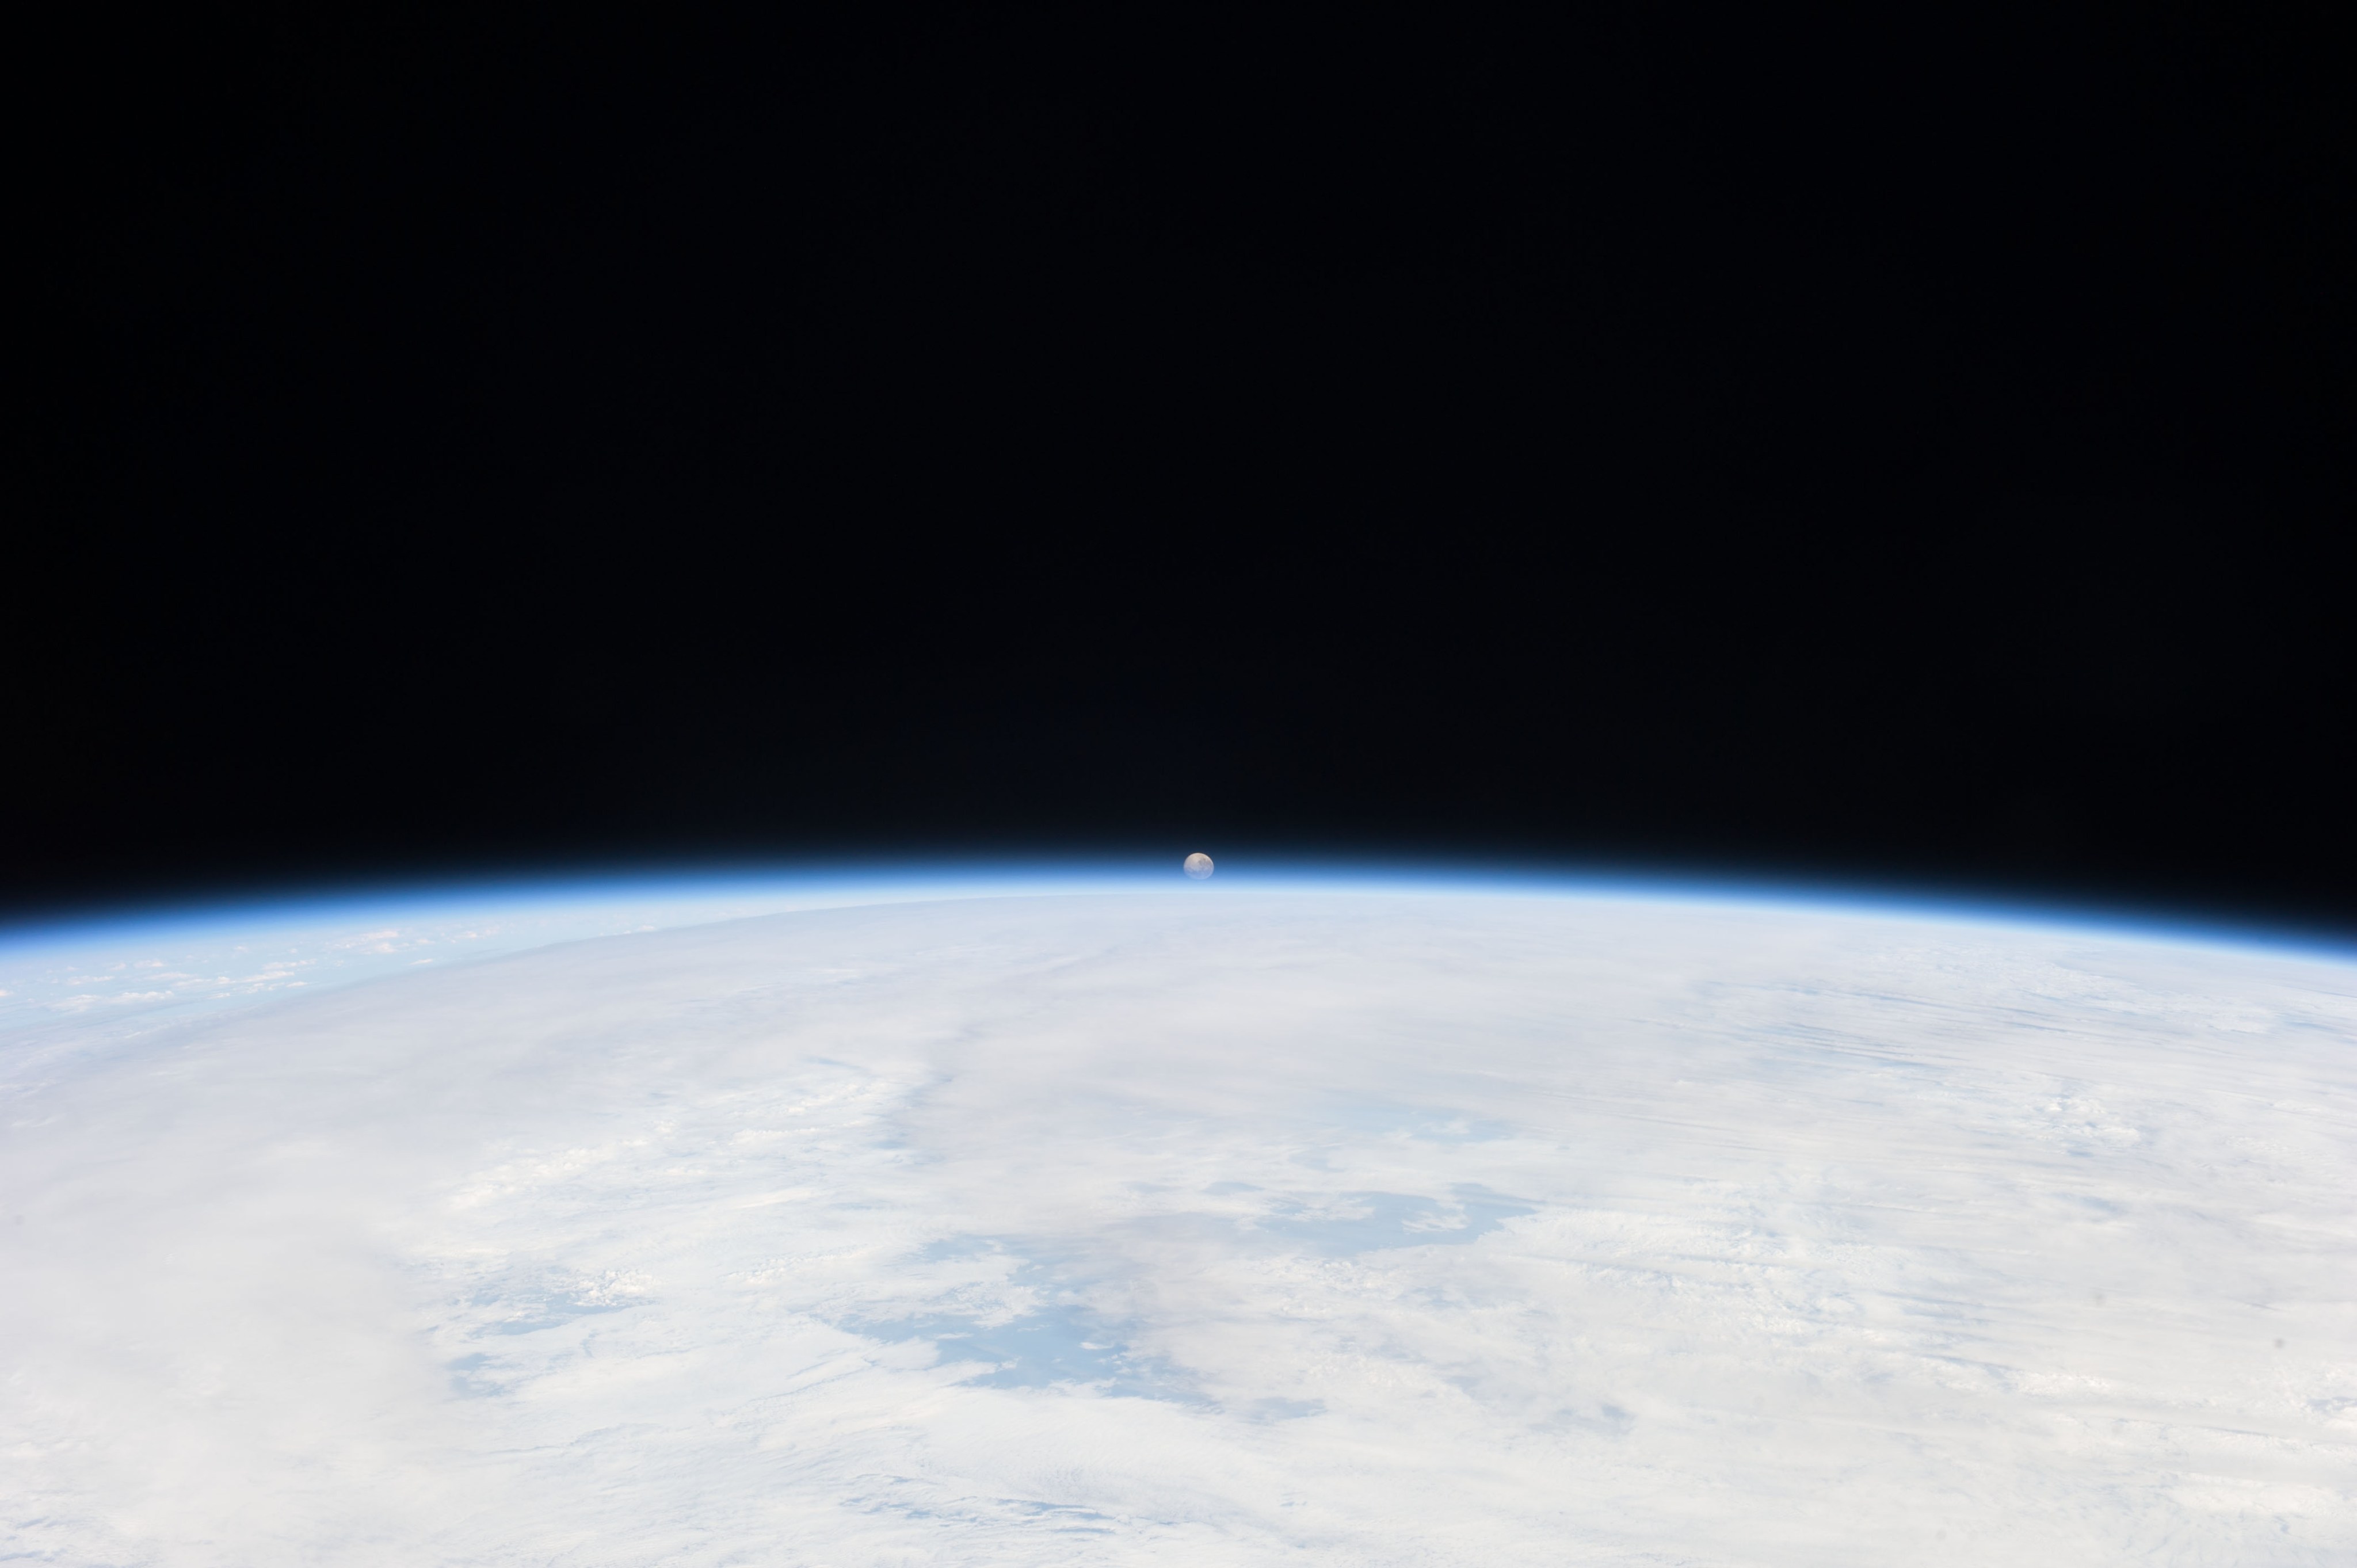 Tiny-looking Moon setting in the distance over Earth's curving, cloud-covered horizon.